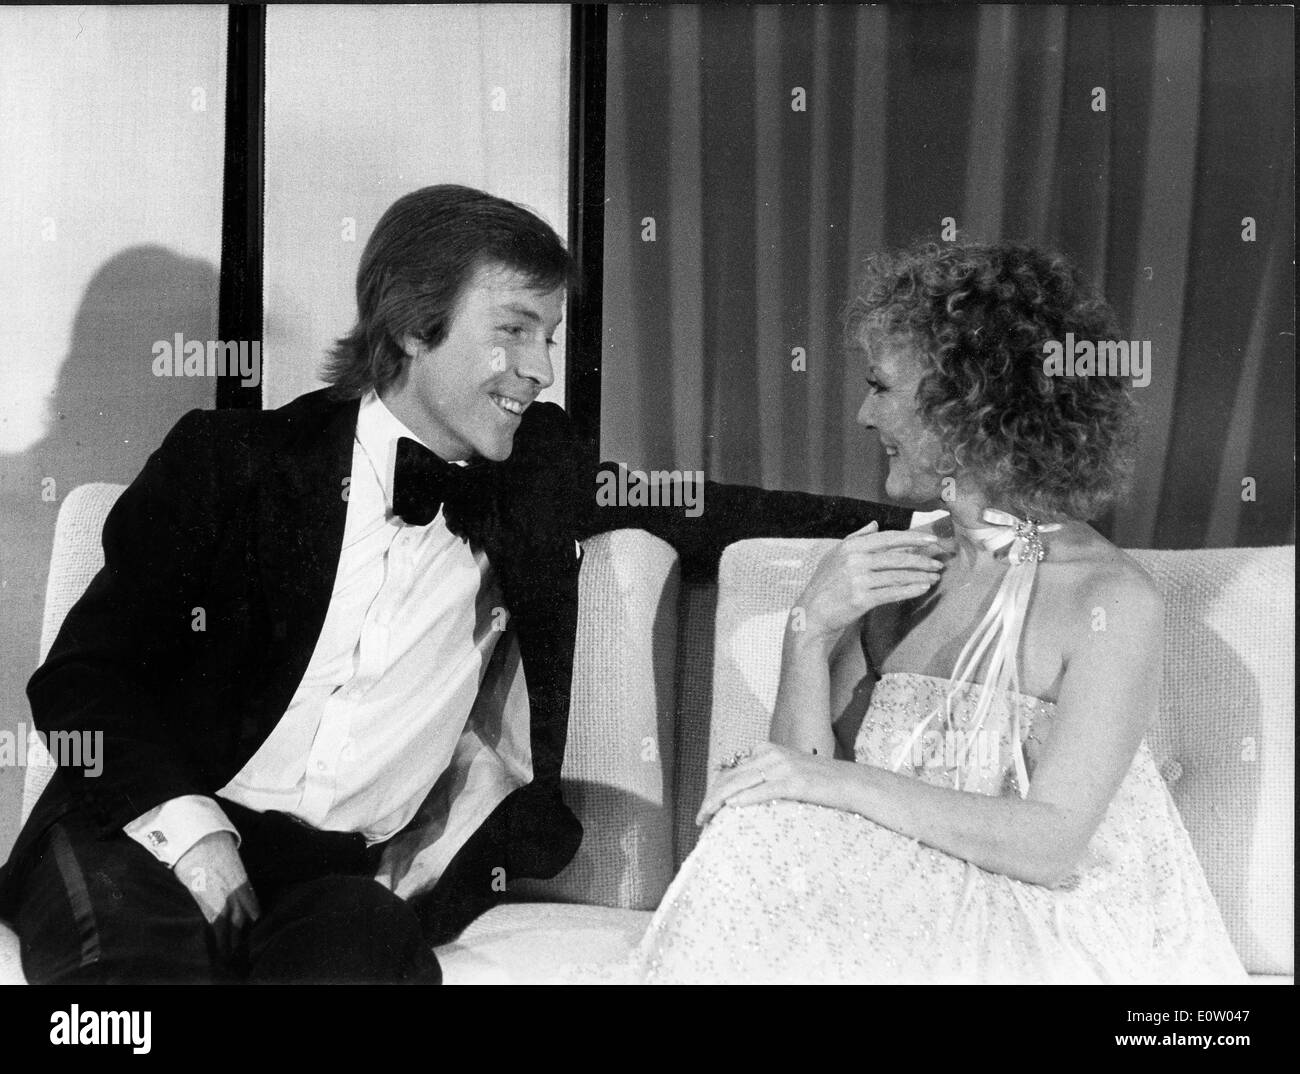 Roddy Llewellyn talking to a woman at a party Stock Photo